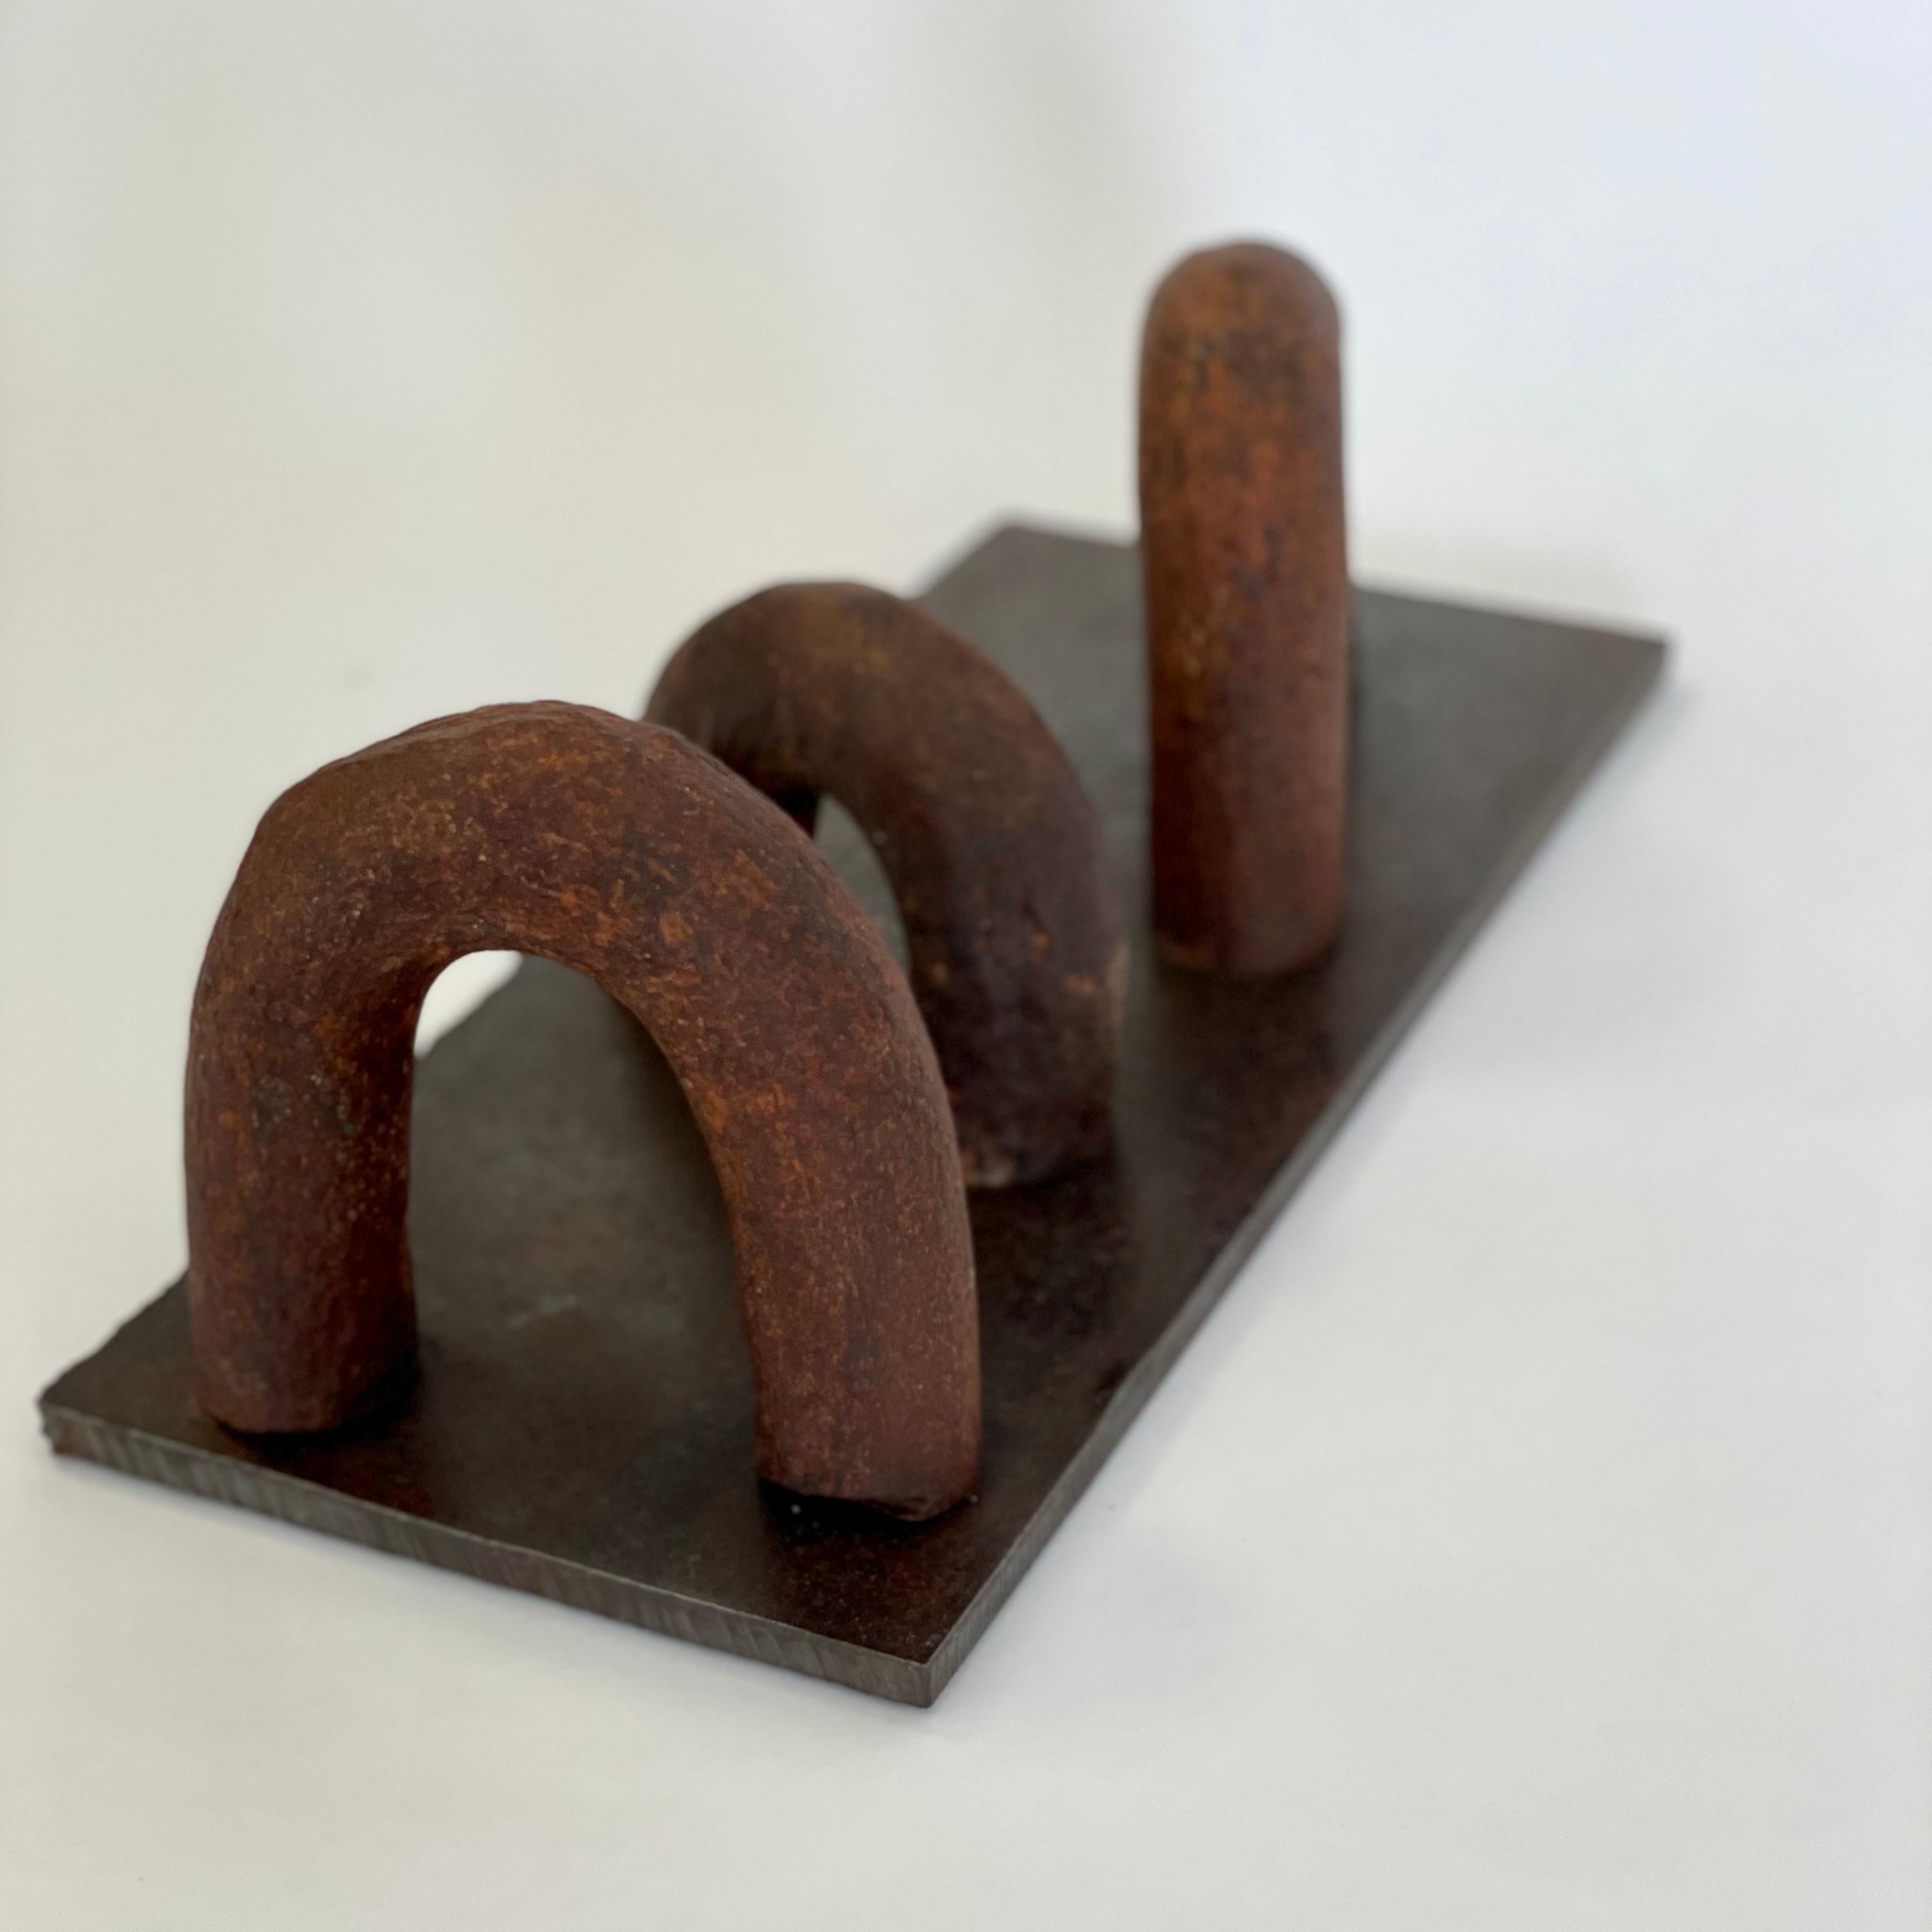 Succession
welded steel
Measures: 6-1/4 x 13-1/2 x 5-1/2 in.

Artist statement:

I seldom use stock material, but prefer distressed and rusted steel that has been scarred, bent, and made imperfect. In this state, the material becomes quite